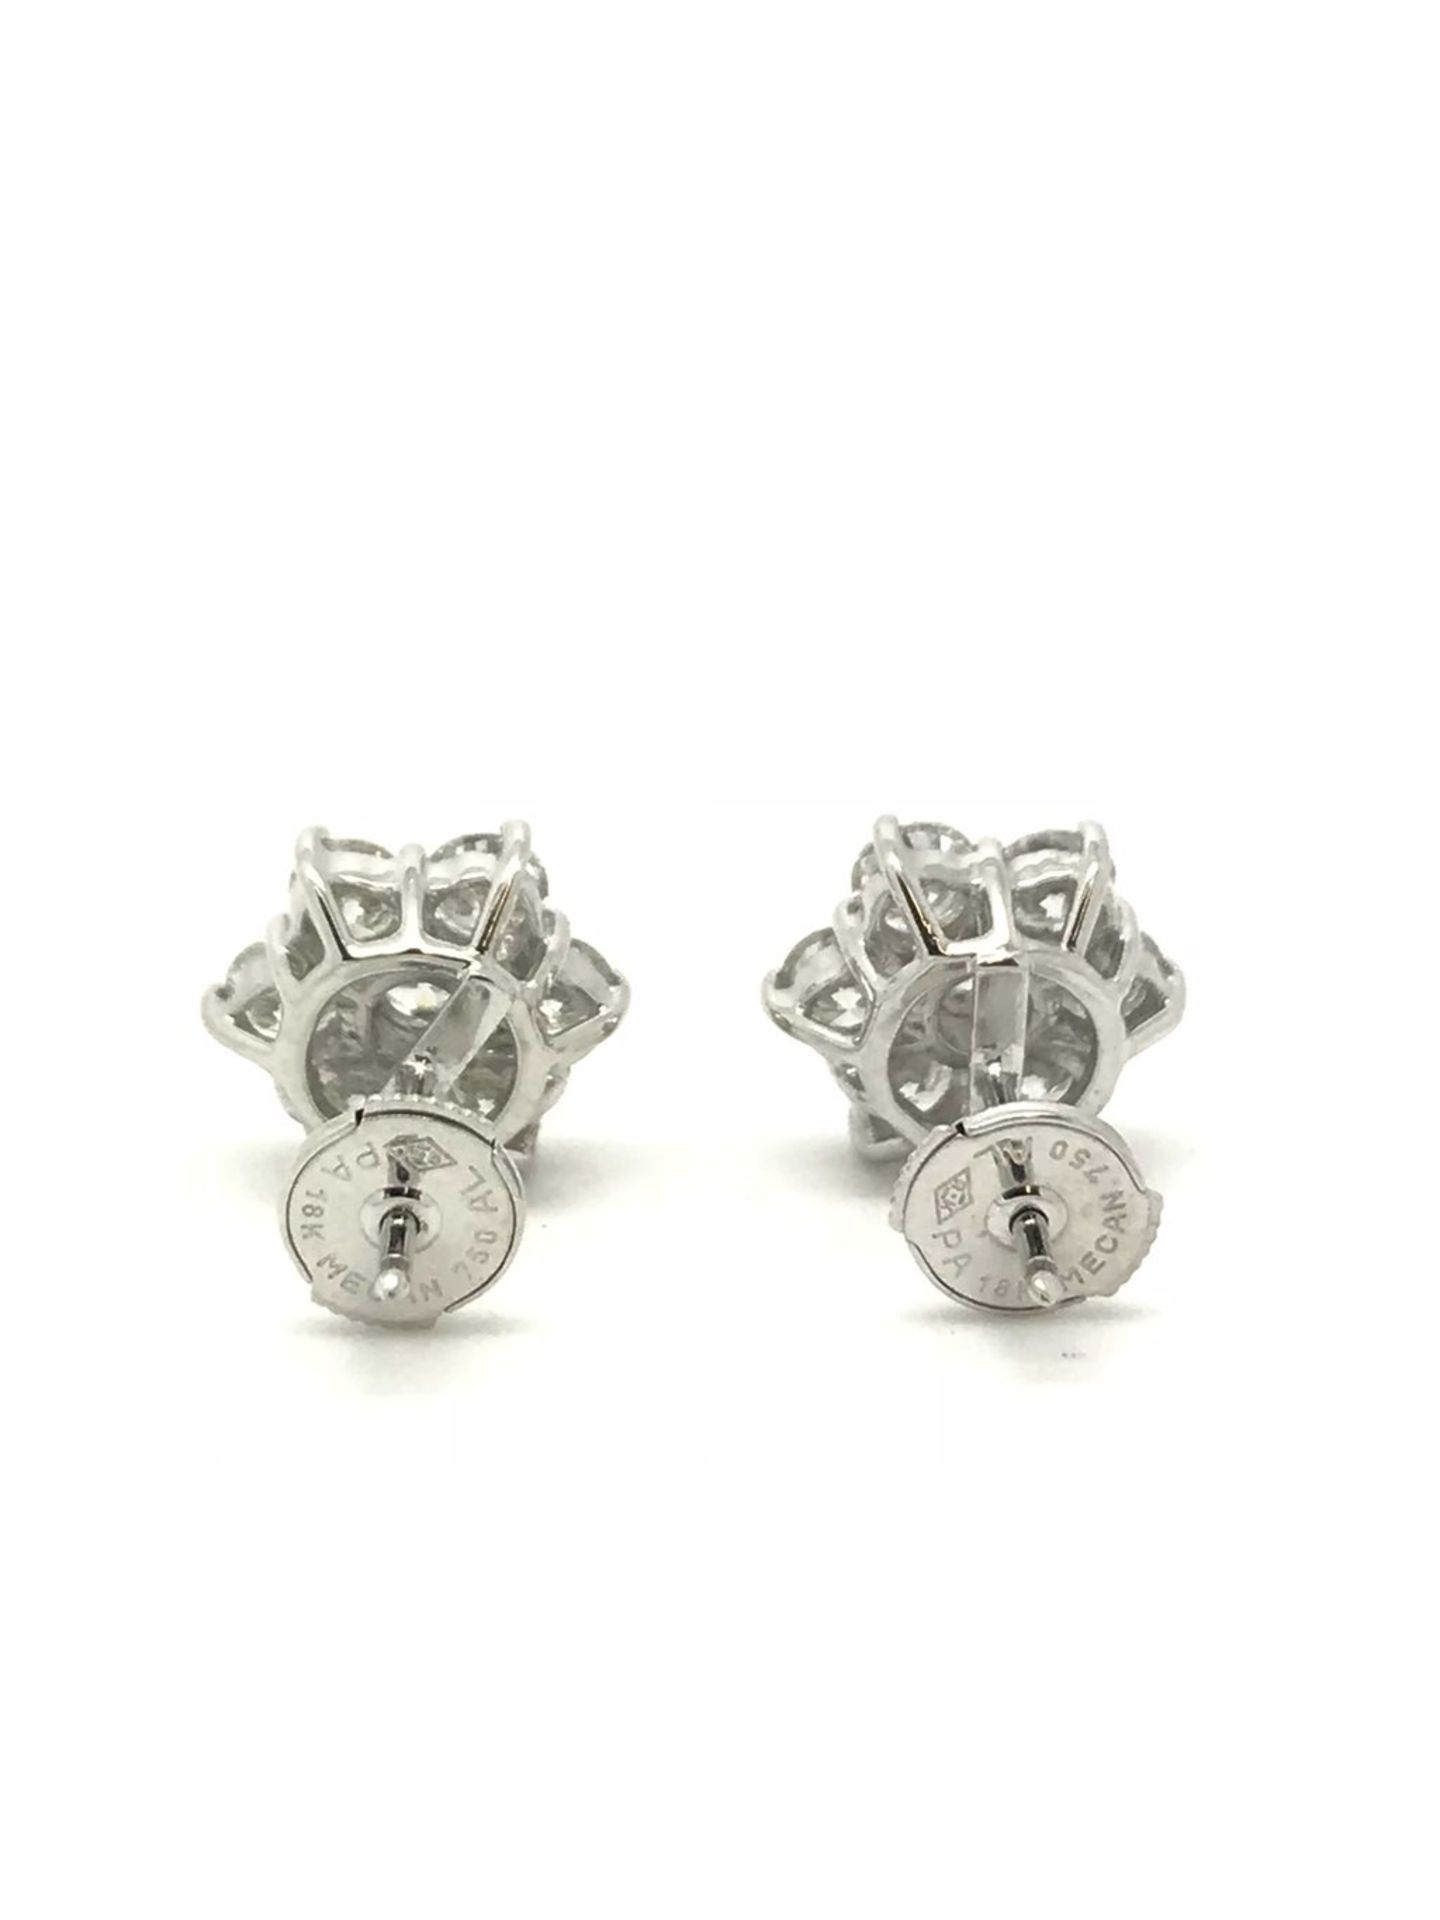 2ct Diamond Cluster Earrings, 18ct White Gold - Image 4 of 5